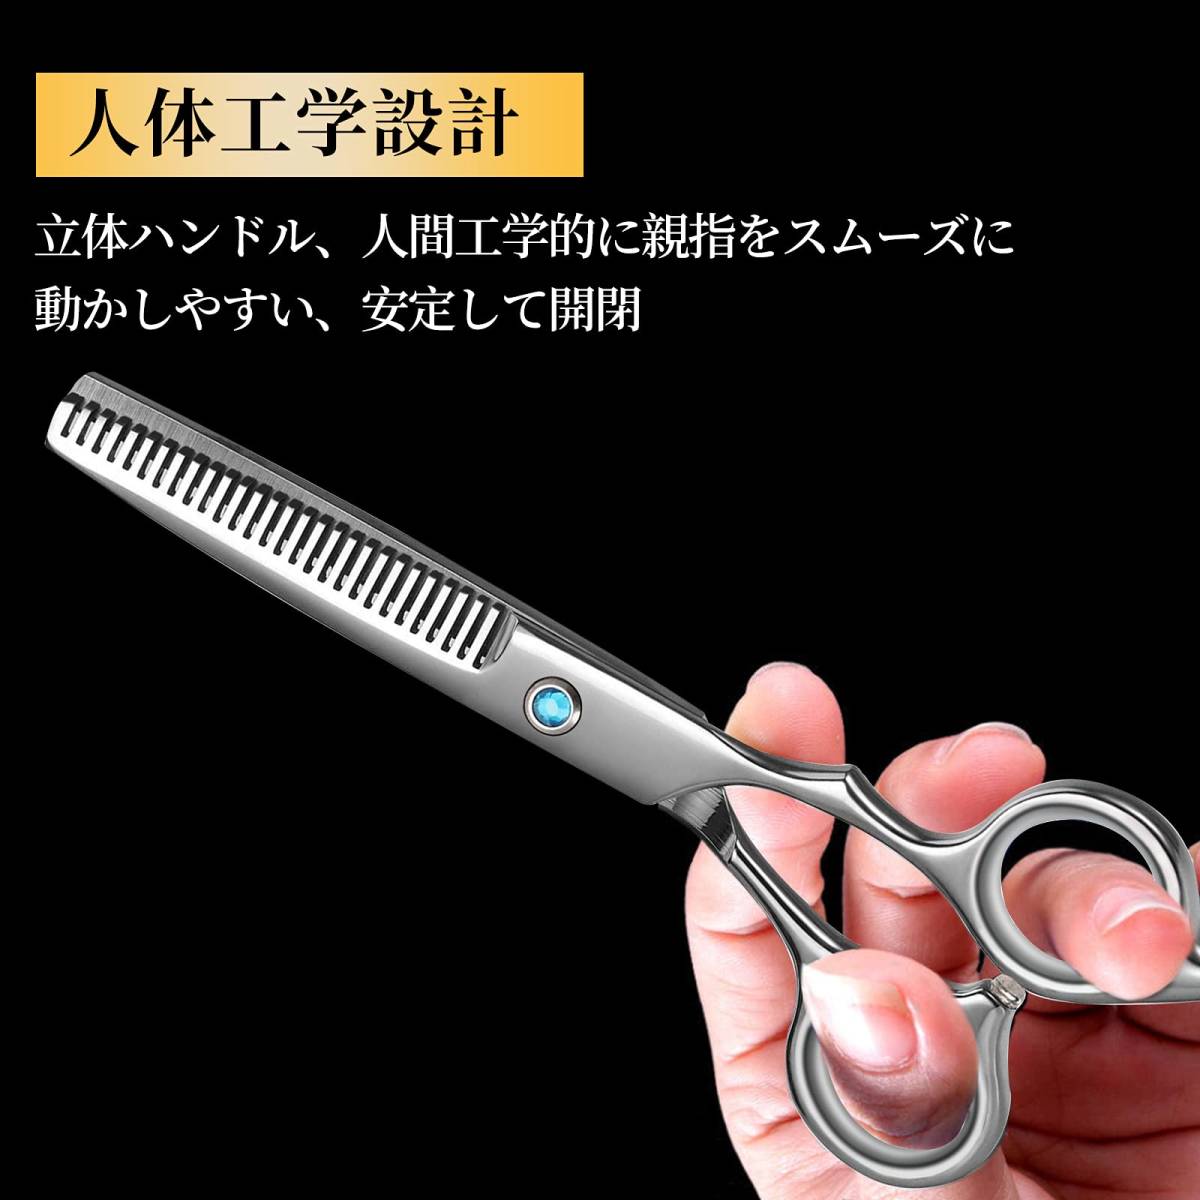 [ special price sale ].. proportion 10% wool amount adjustment .15% hair shears hair cut made of stainless steel tongs beauty . high class forged finish beginner ...